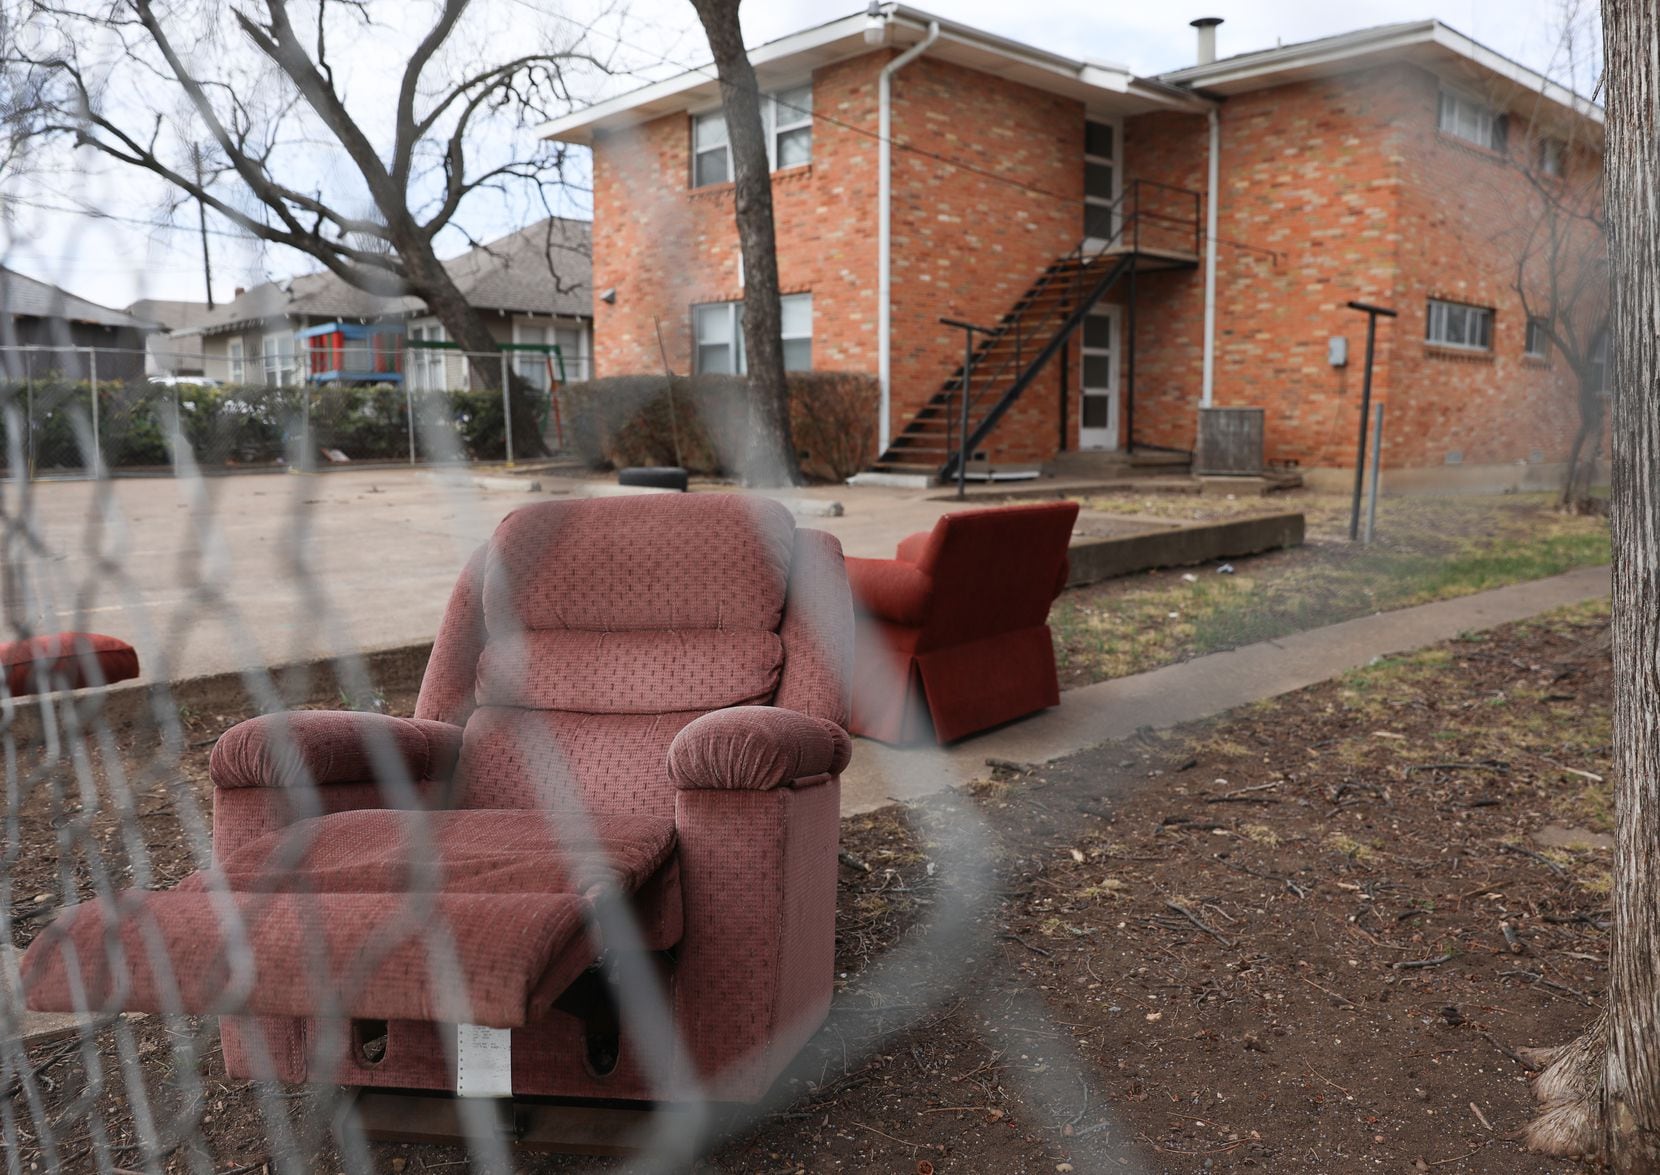 A few breaks in the fencing along West Eighth Street between Llewellyn and Adams provided...